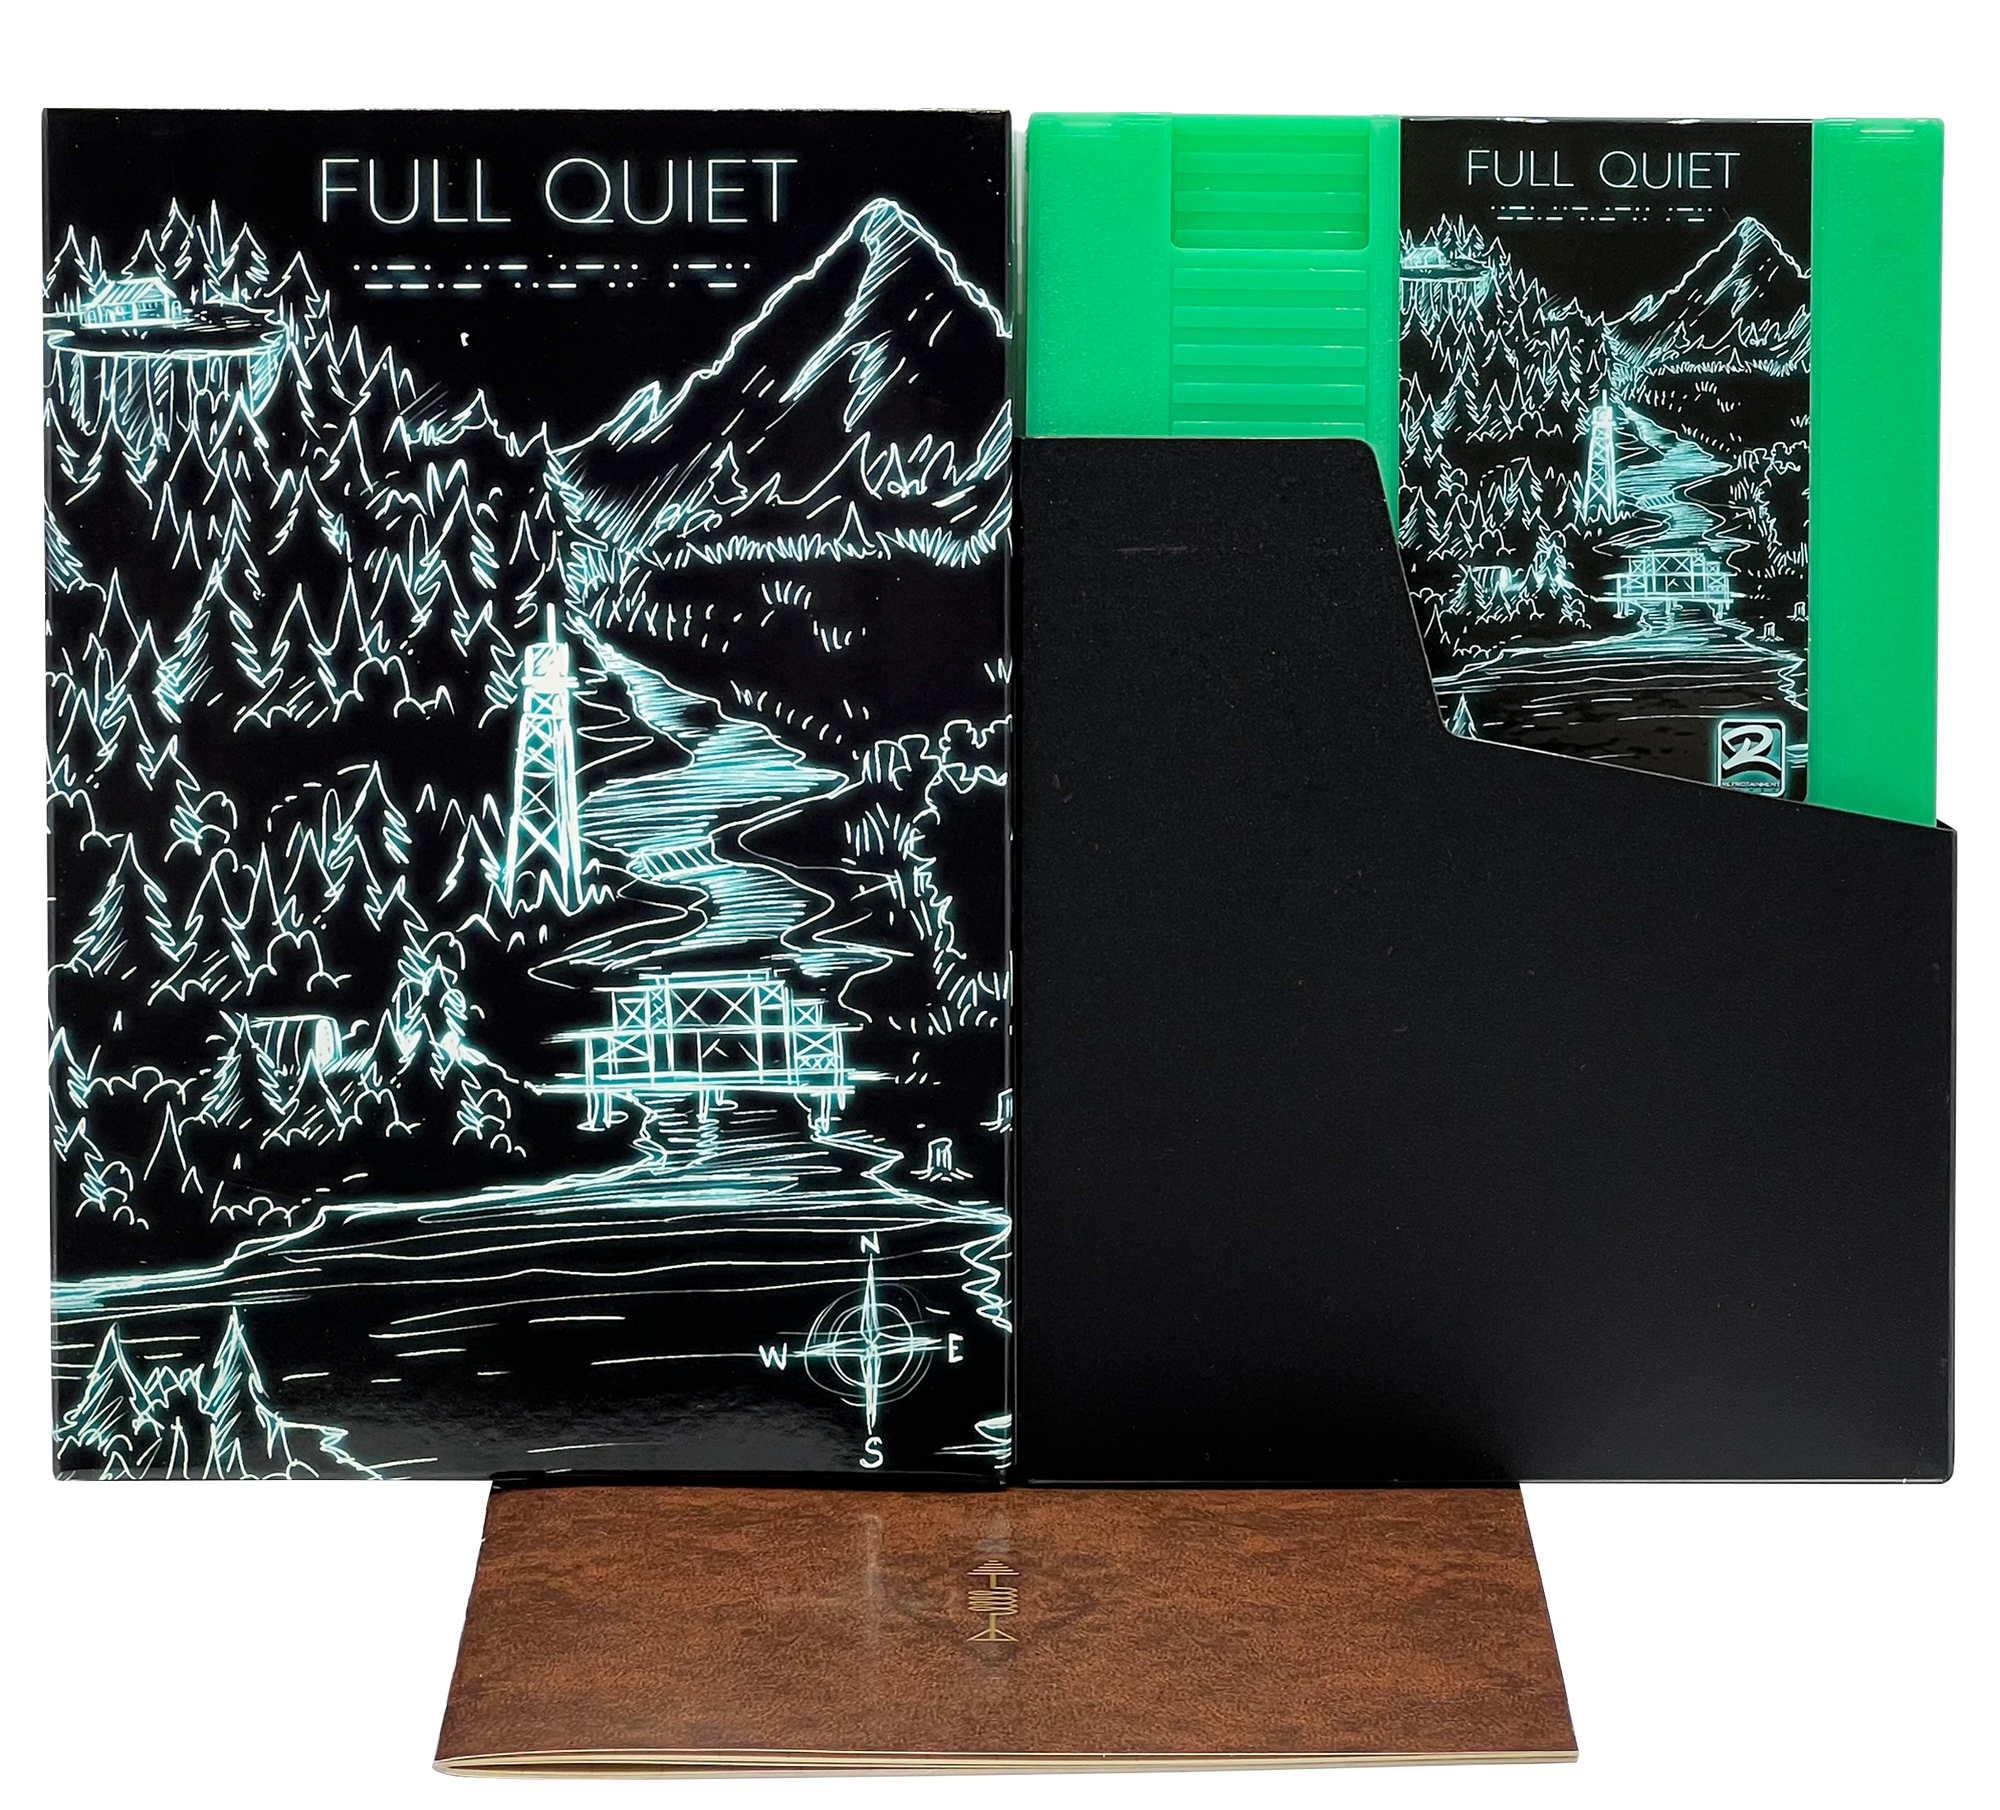 Full Quiet (Regular Edition) NES Game (Green Glow Cartridge Complete in Box) Shipping Soon!